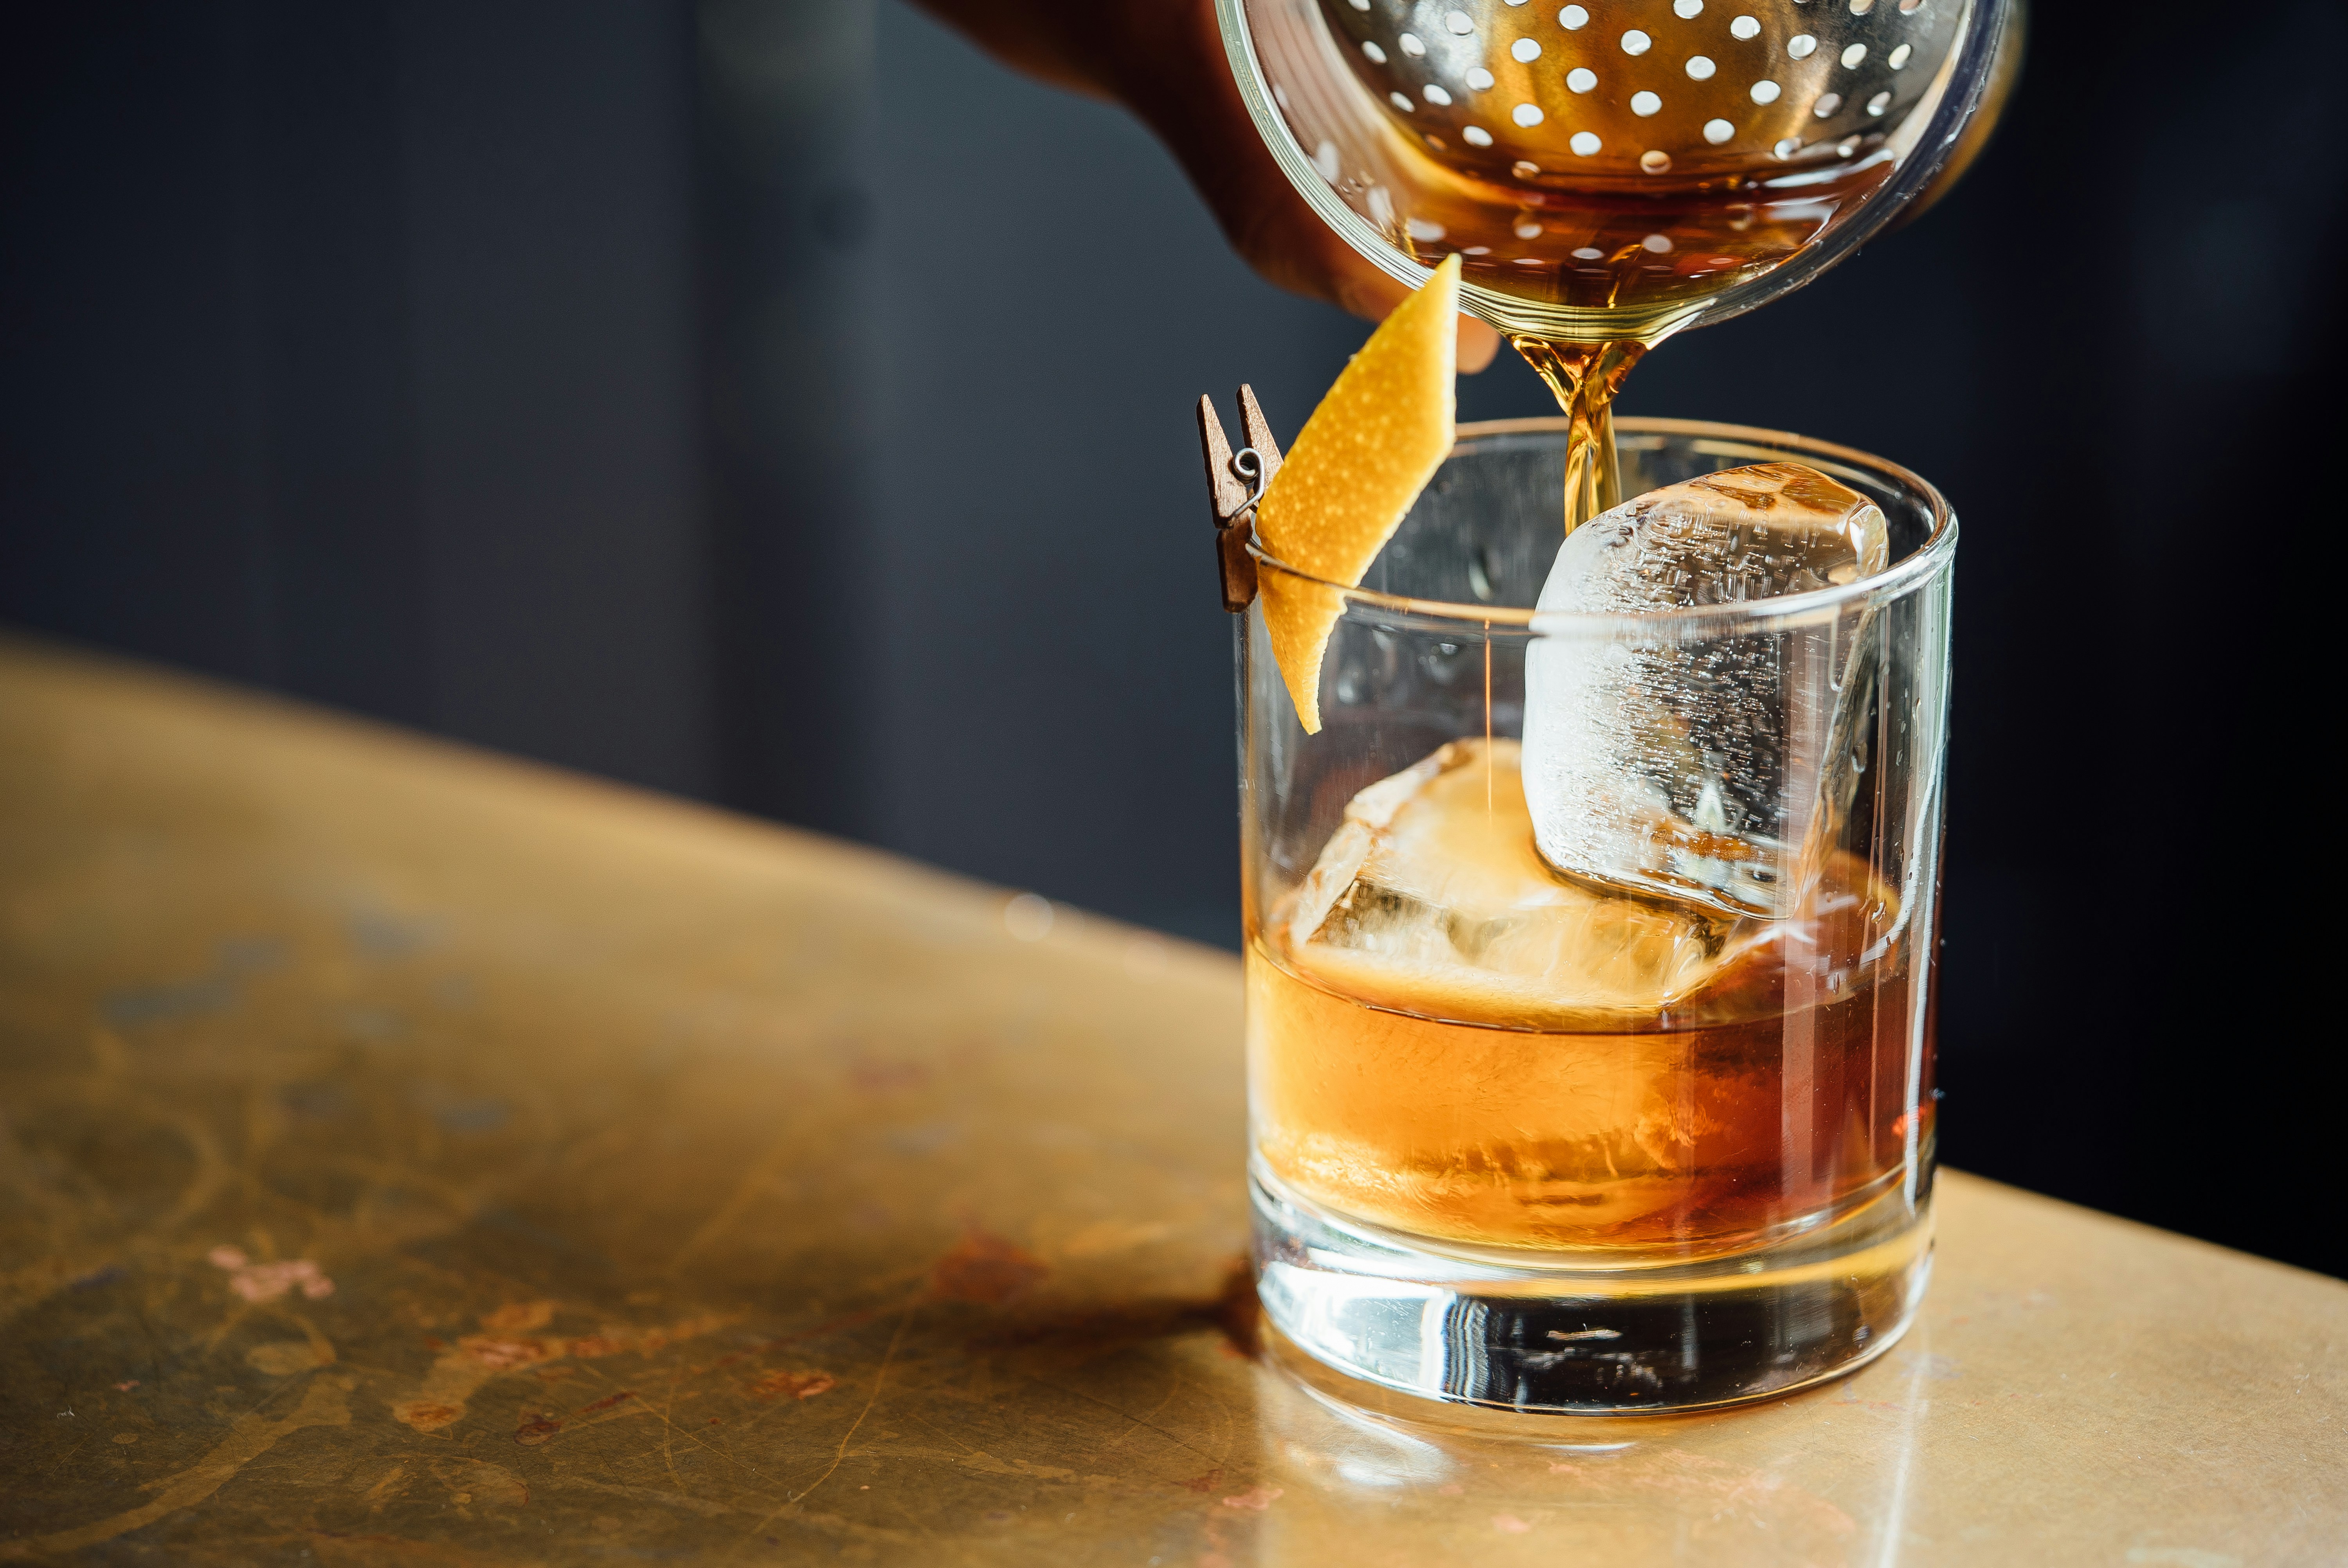 What Flavors And Aromas Should You Look For When Drinking Whiskey?